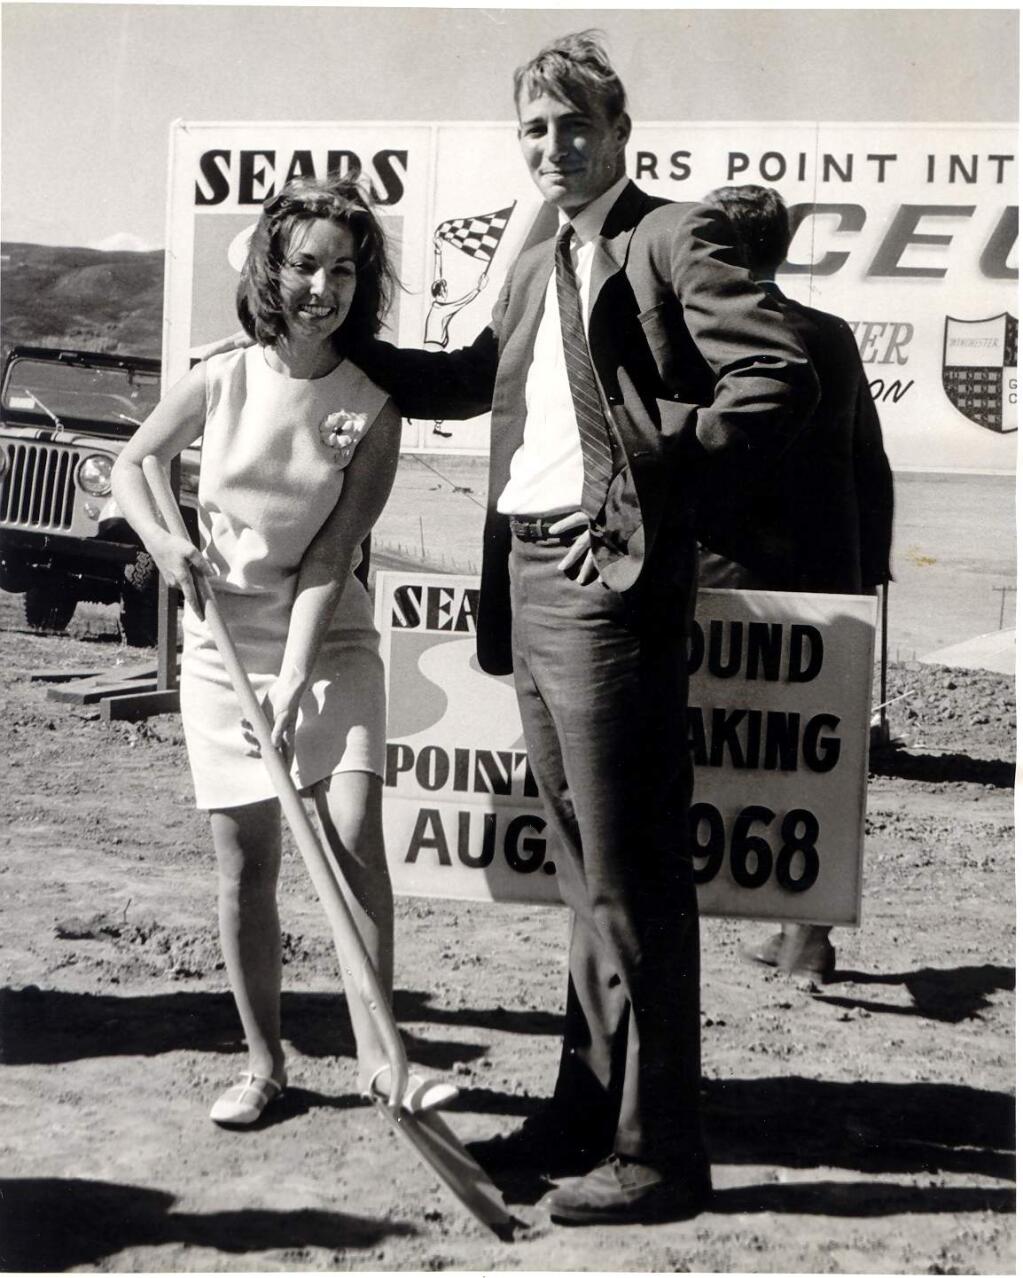 An image from the original raceway groundbreaking in 1968. People are unidentified, but the shovel pictured will be used at the 50th anniversary event.